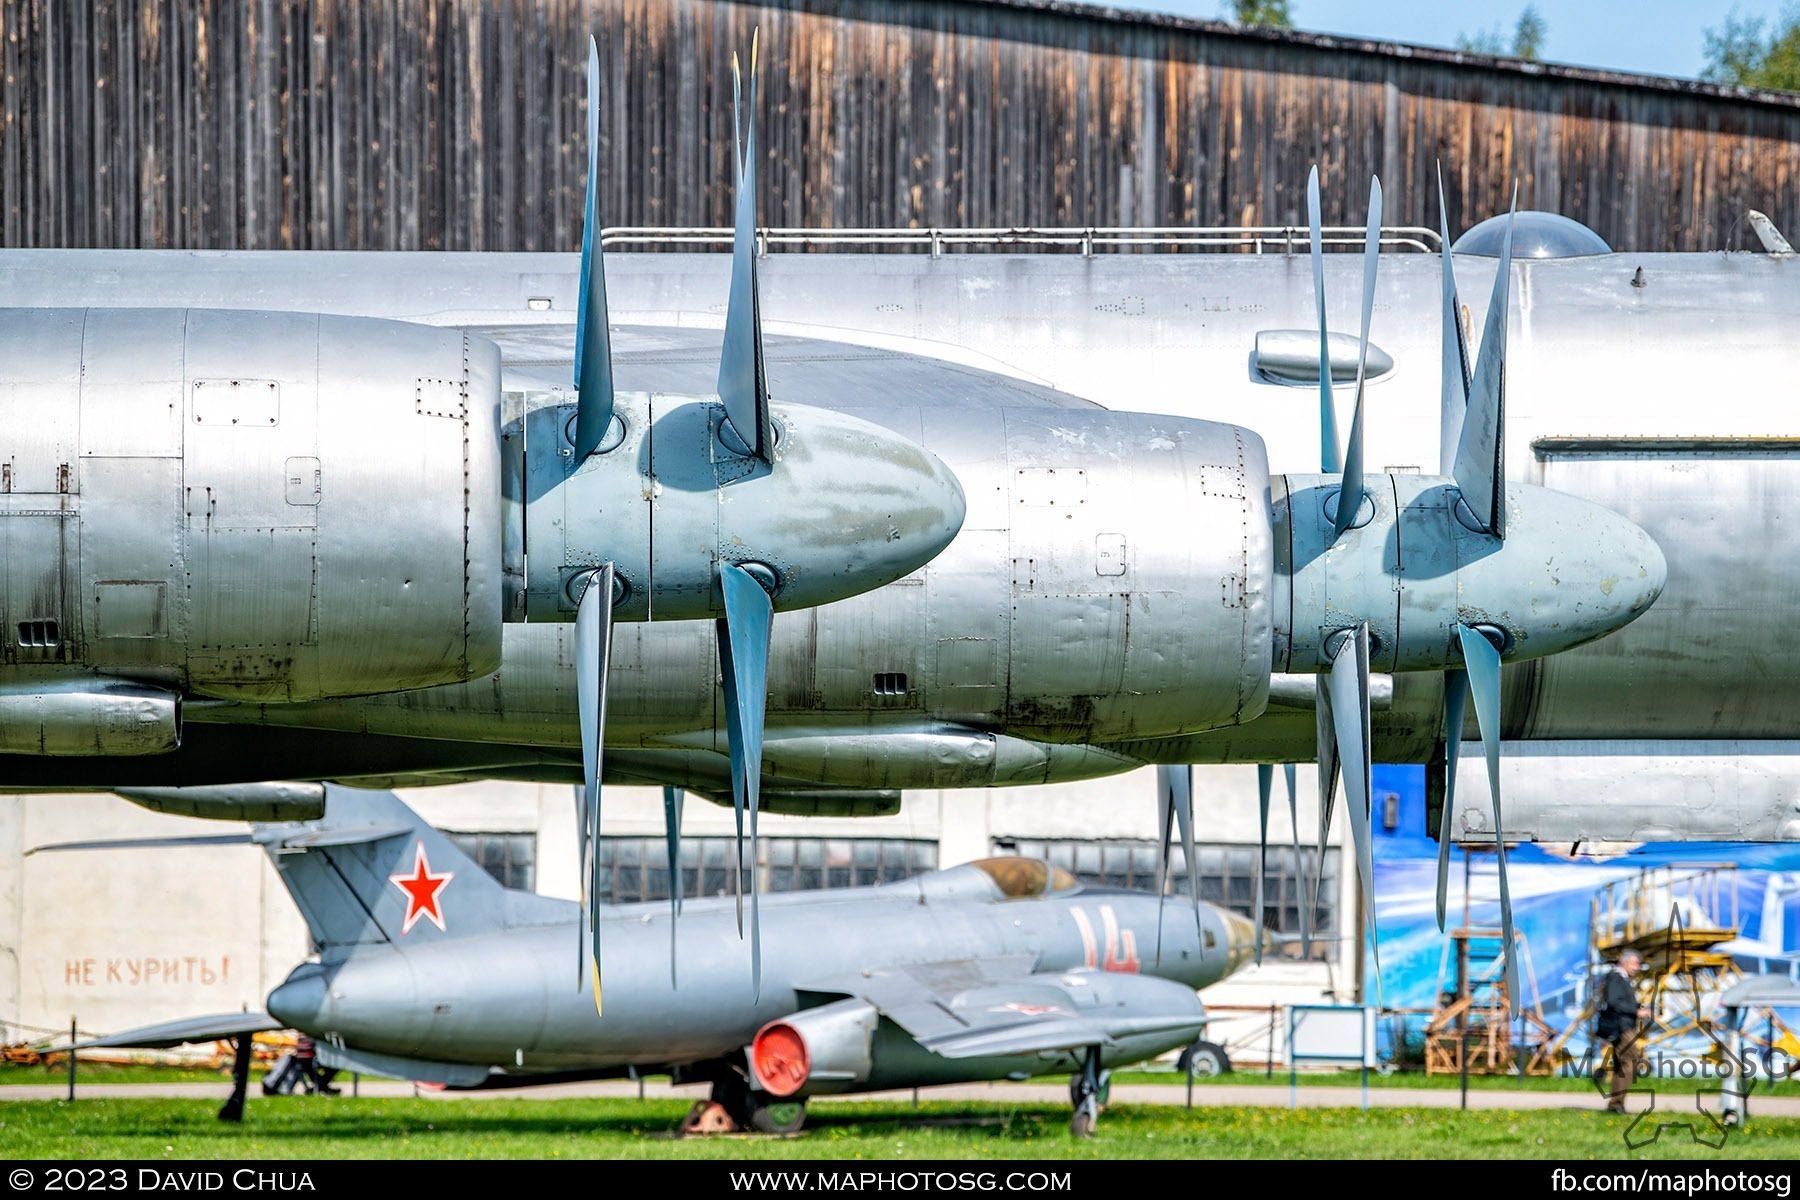 Iconic propellers of the Tupolev Tu-95